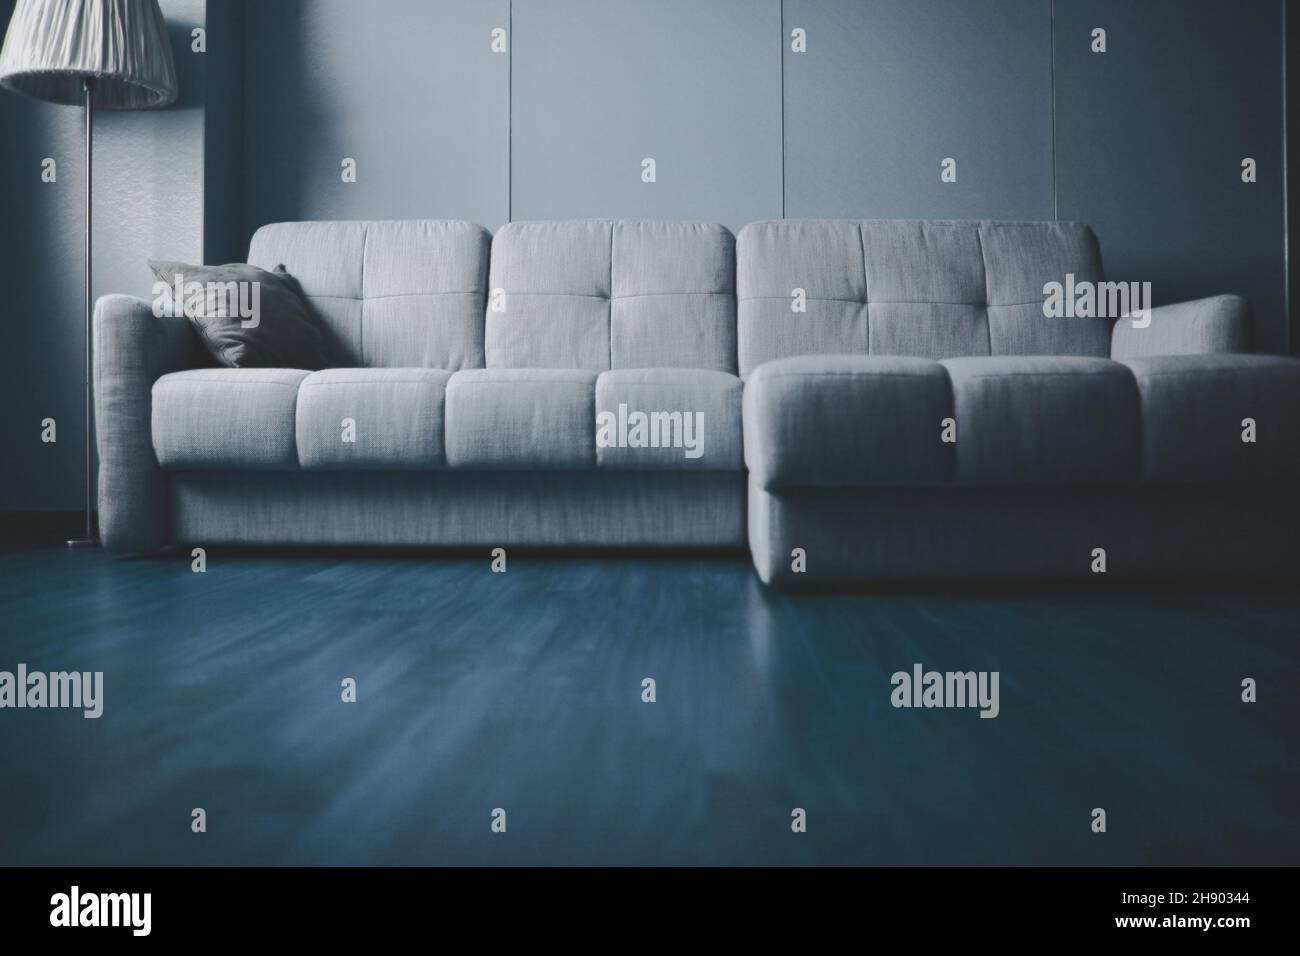 Apartment interior with couch and floor lamp along the wall. Stock Photo